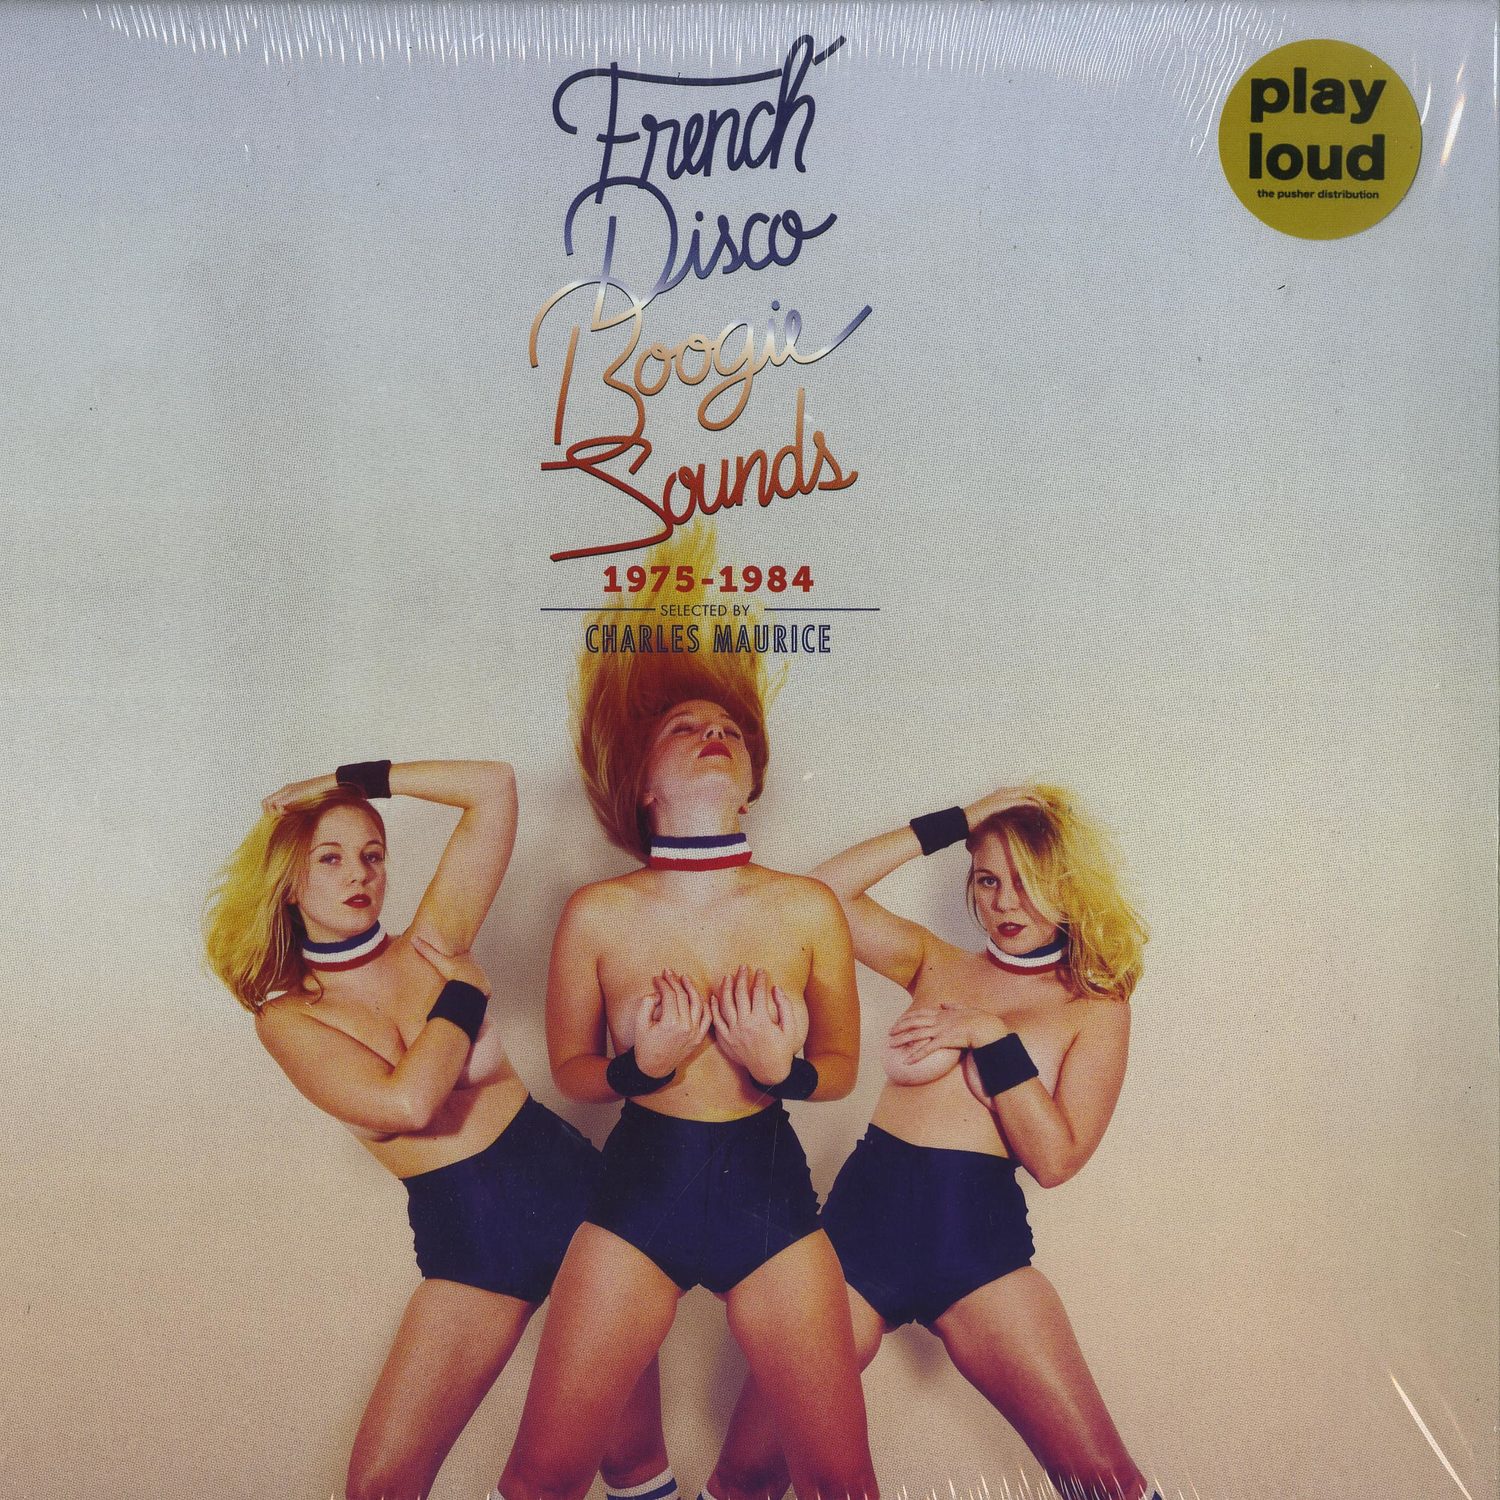 Various Artists - FRENCH DISCO BOOGIE SOUNDS 1975-1984 